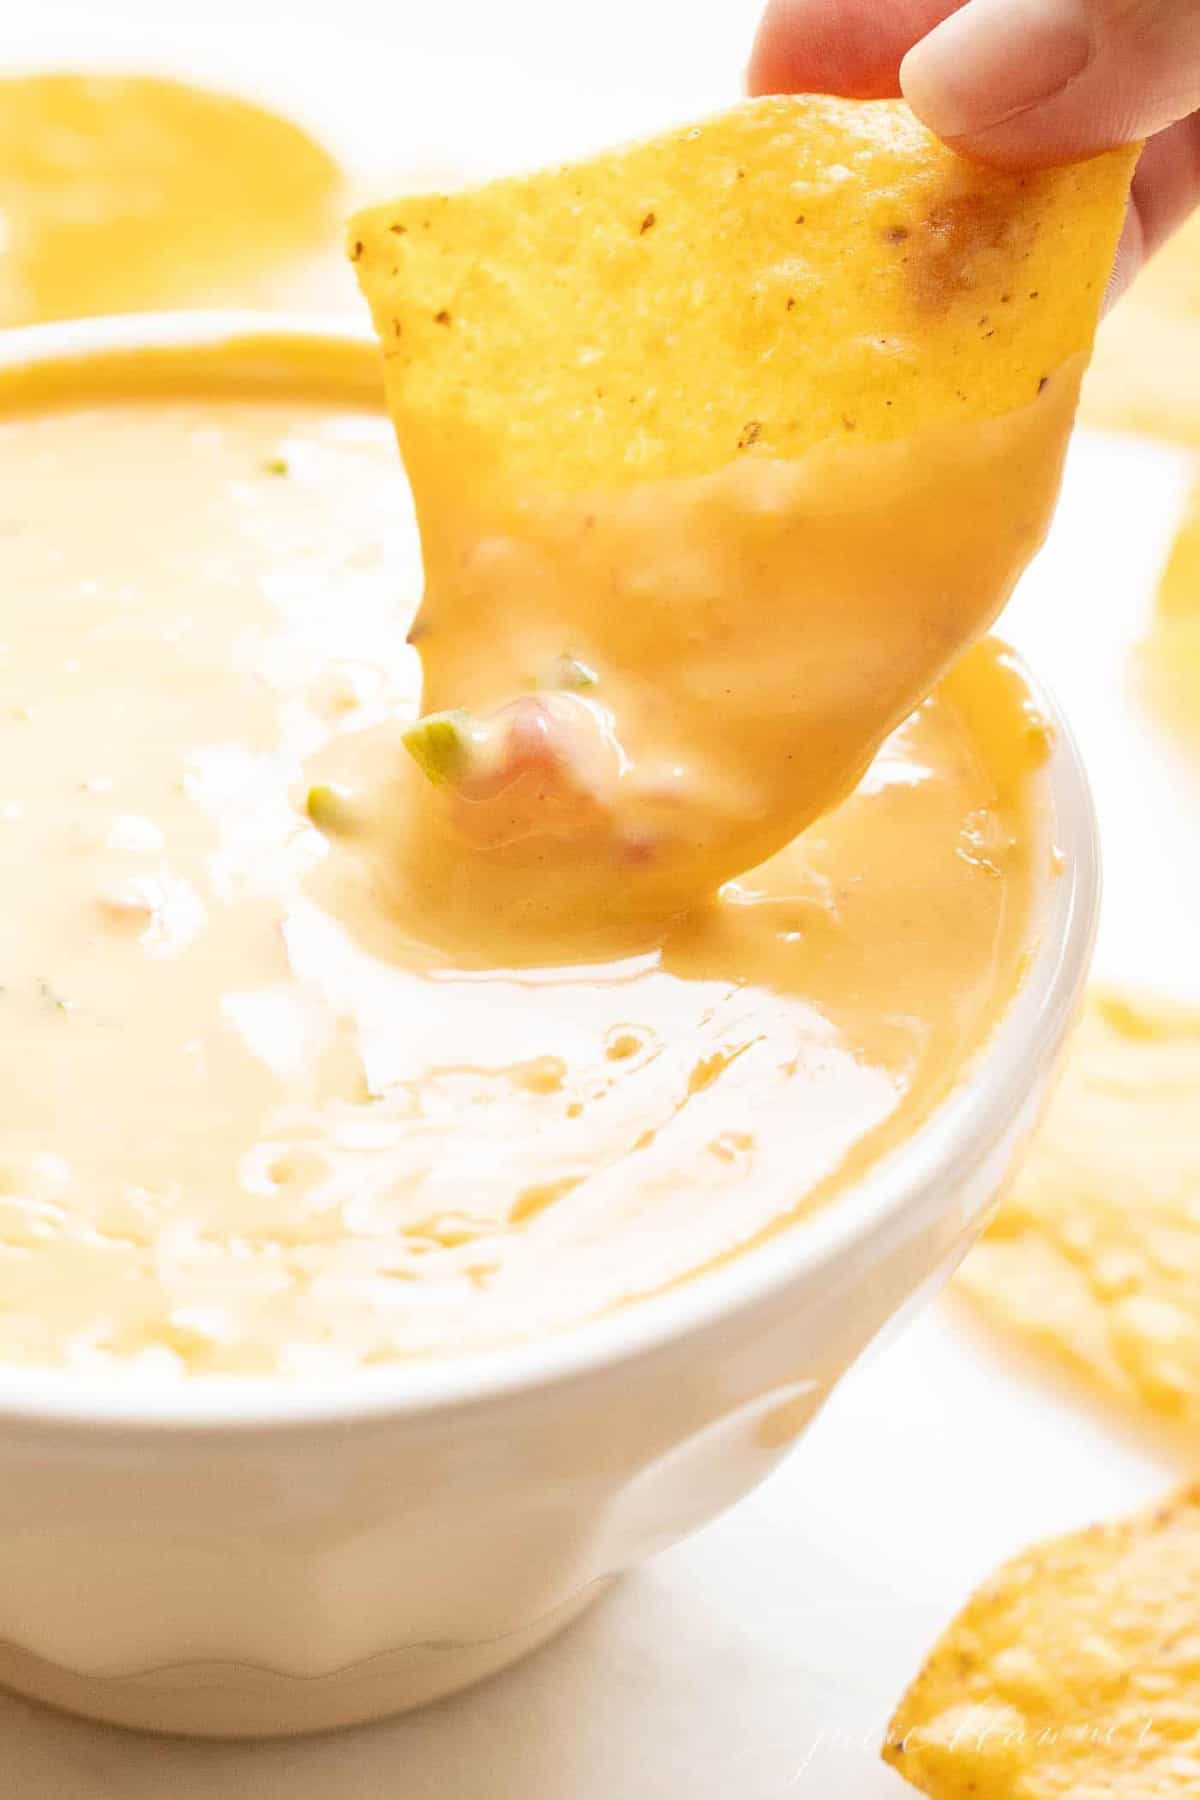 A hand reaching into a bowl full of Velveeta cheese dip, chips surrounding the bowl.